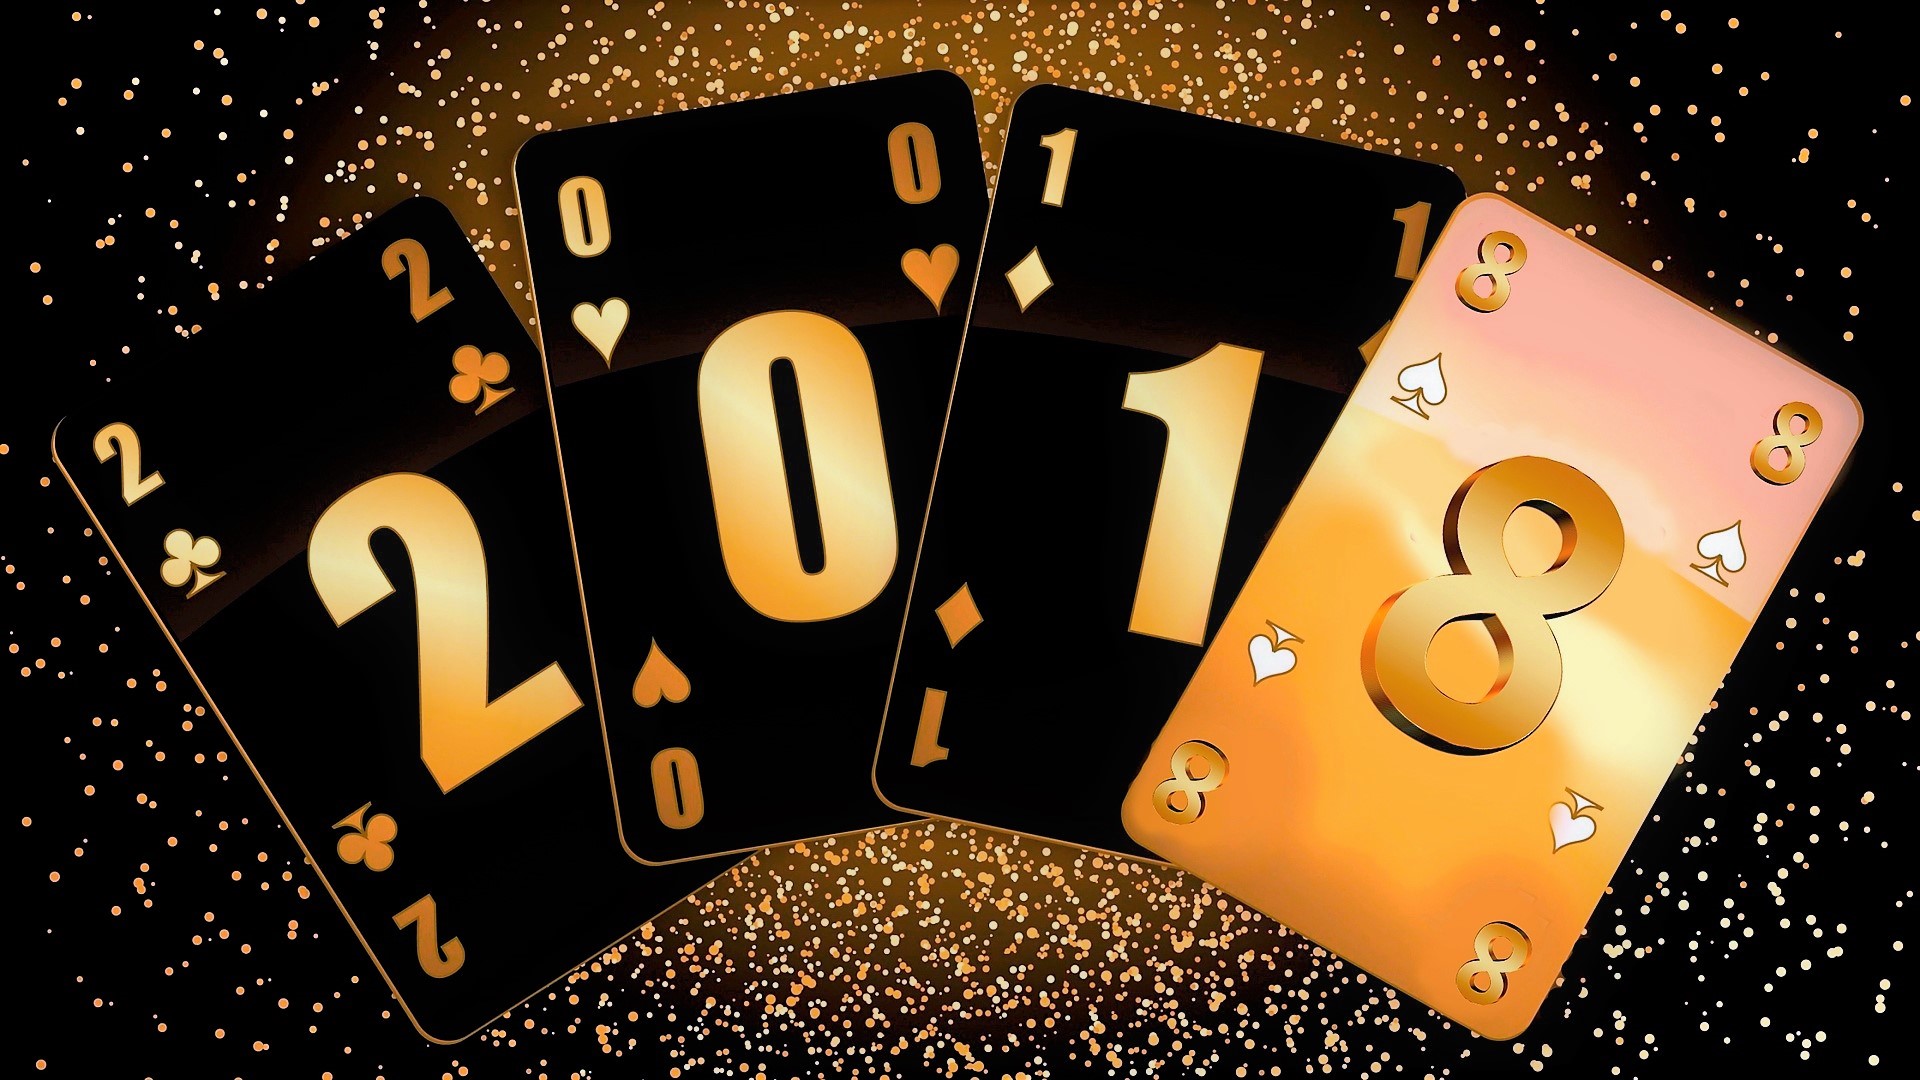 Card New Year New Year 2018 Silver Sparkles 1920x1080